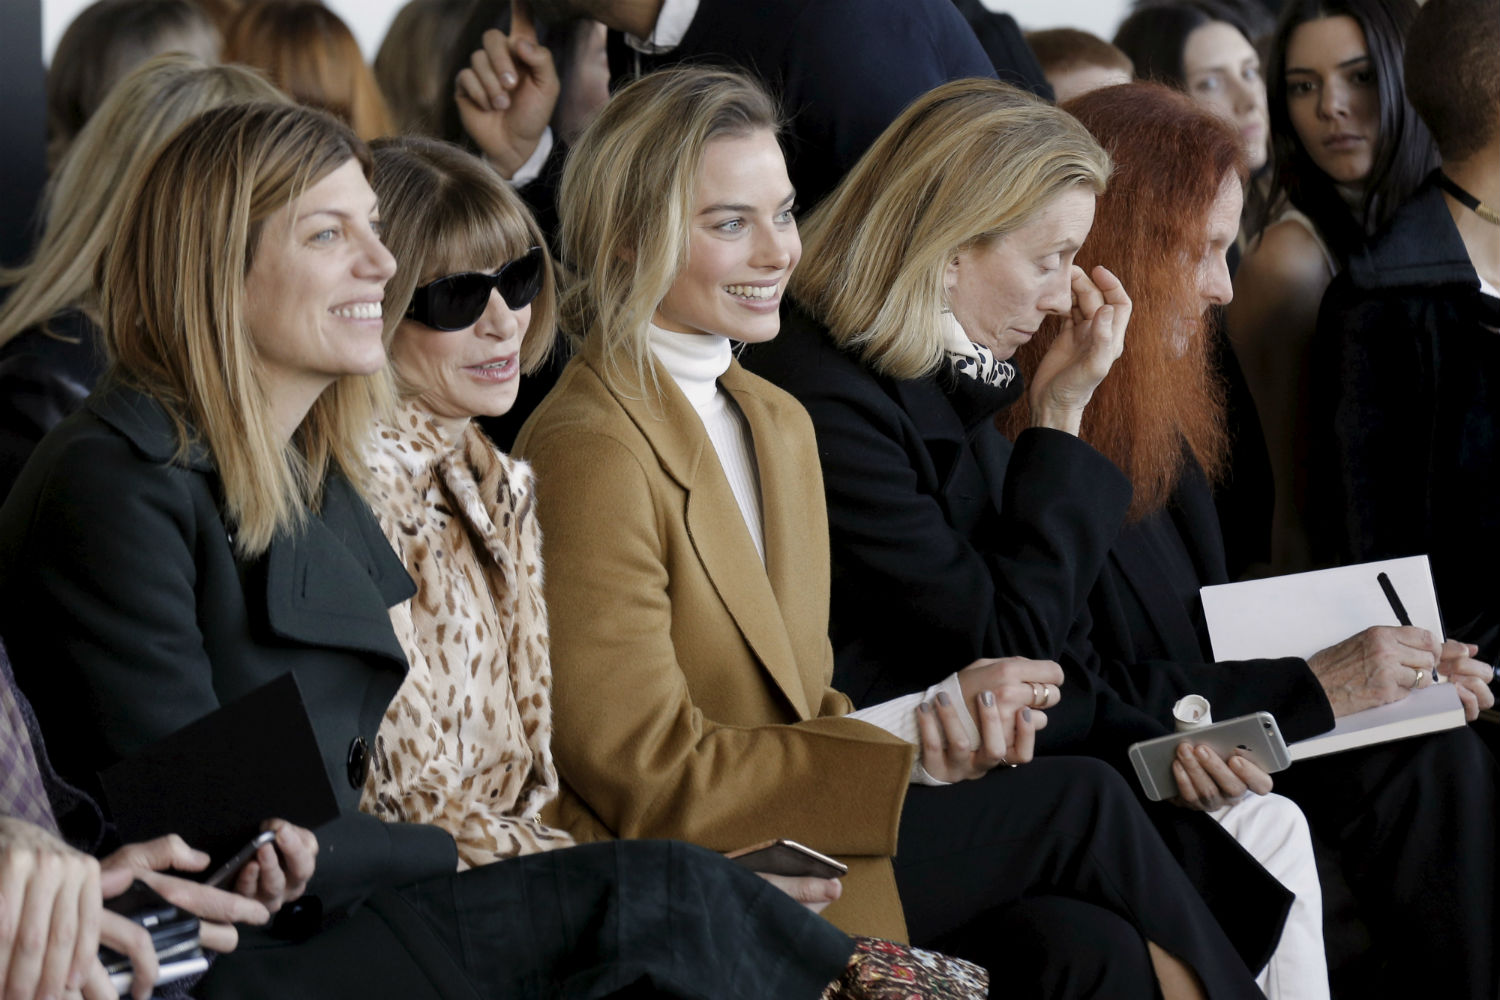 Vogue's Fashion Market/Accessories Director Virginia Smith, editor-in-chief Anna Wintour and actress Margot Robbie (L to R) attend the Calvin Klein Fall/Winter 2016 collection during New York Fashion Week in New York, February 18, 2016. REUTERS/Brendan McDermid